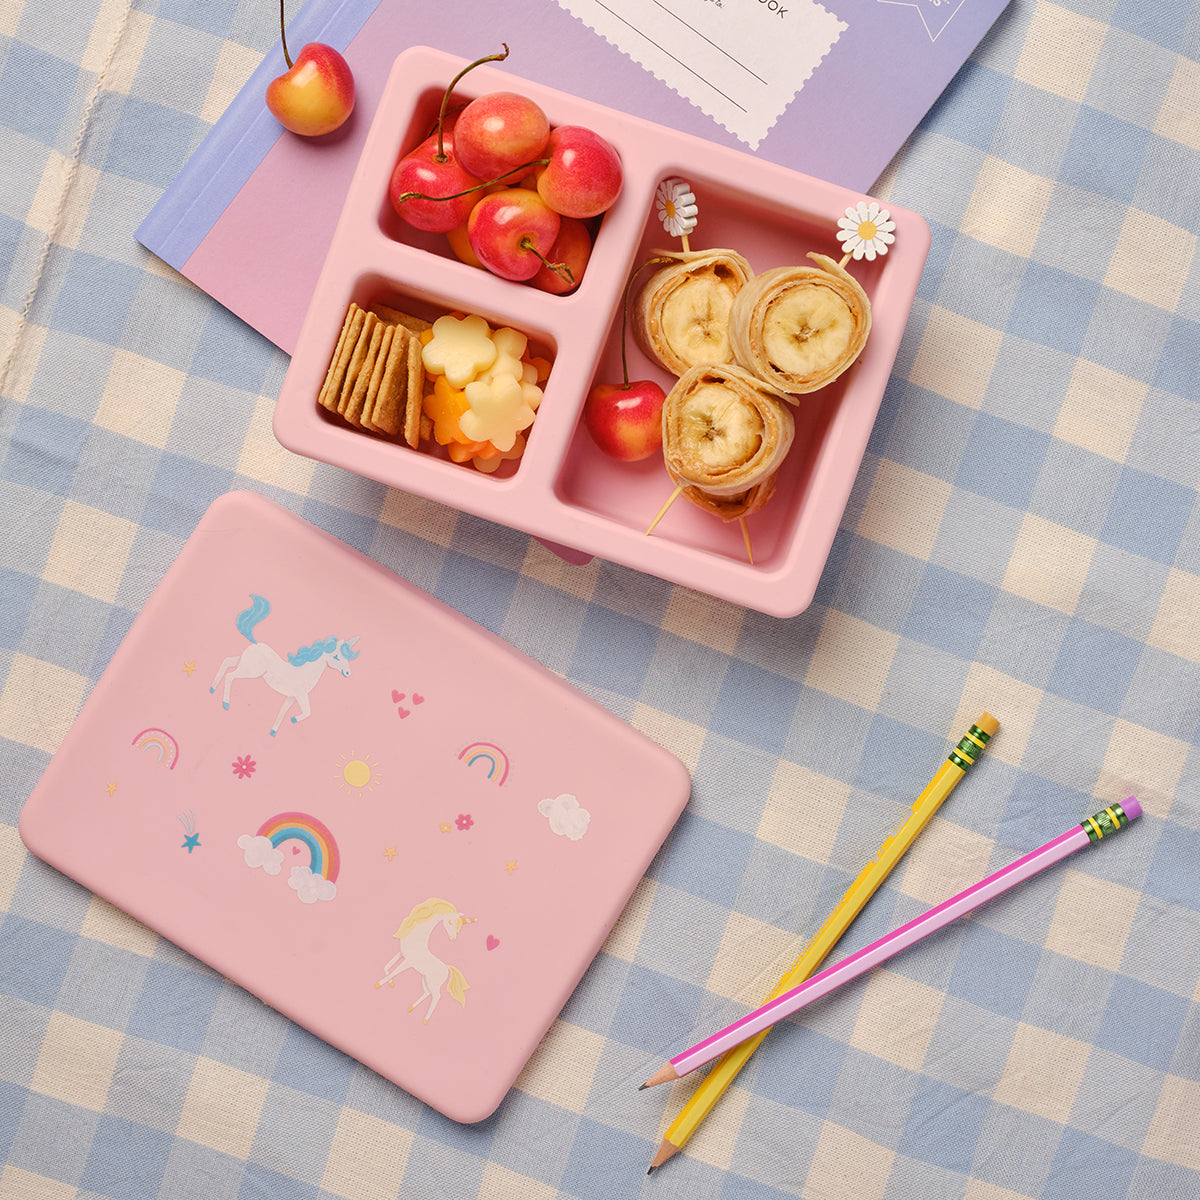 pink lunch bento box with three compartments in unicorn print